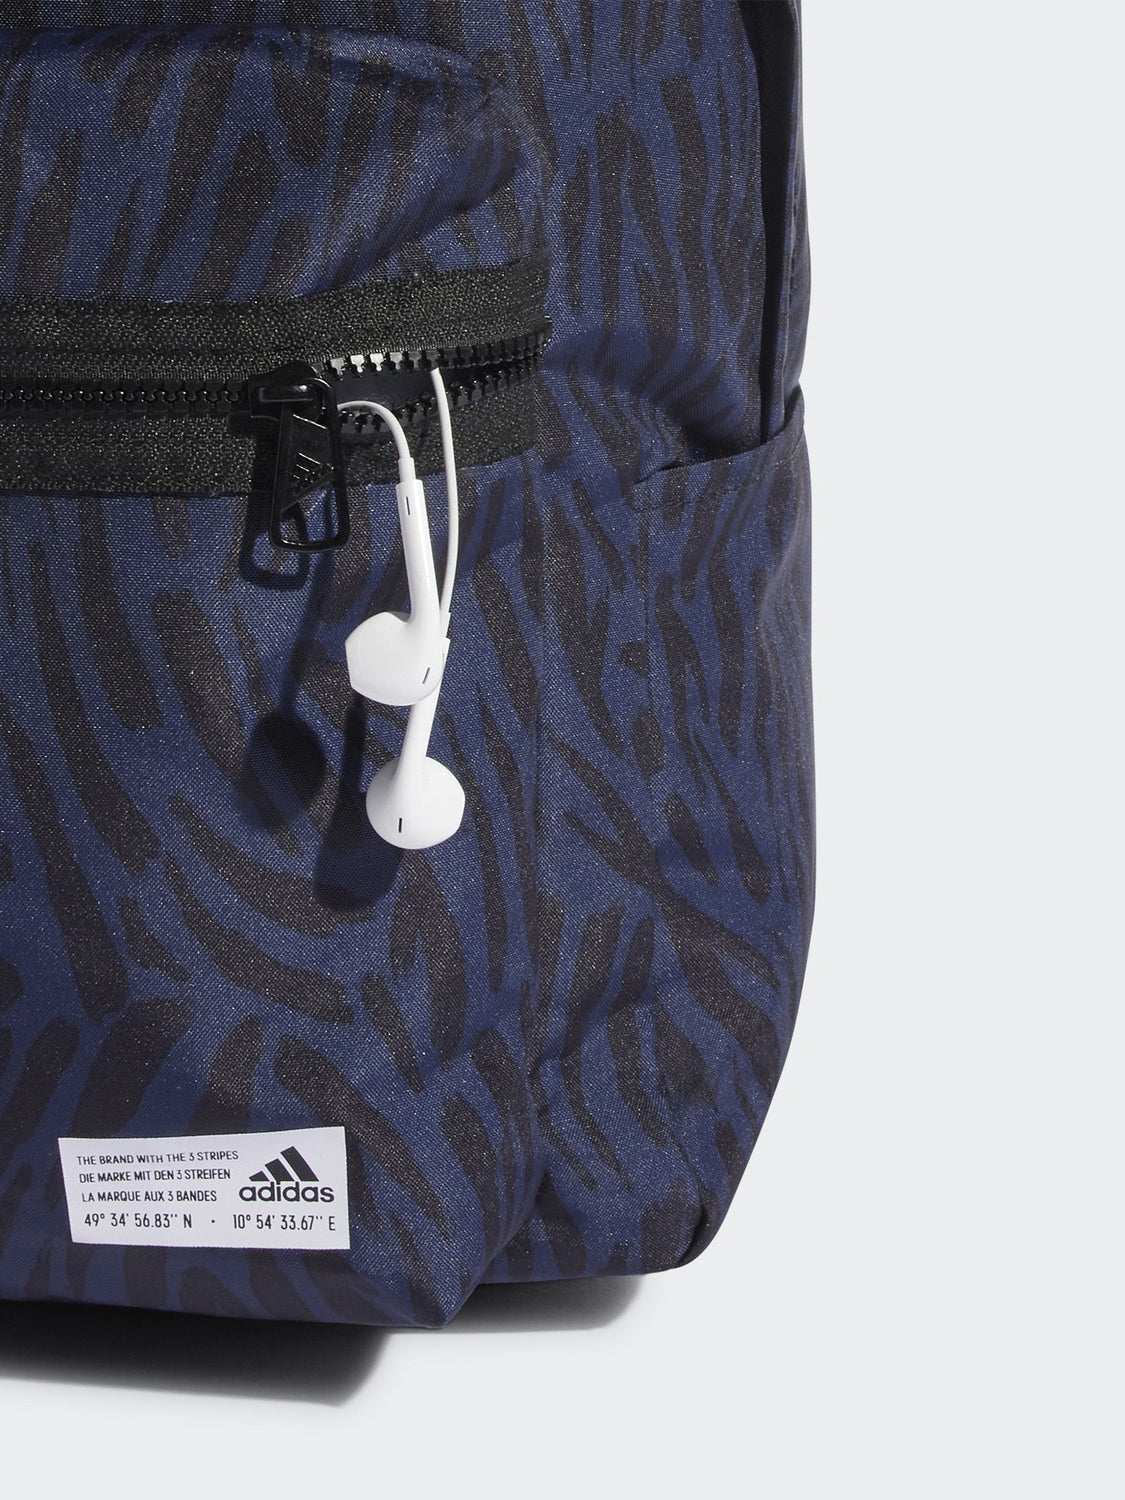 Backpack - Graphic Print